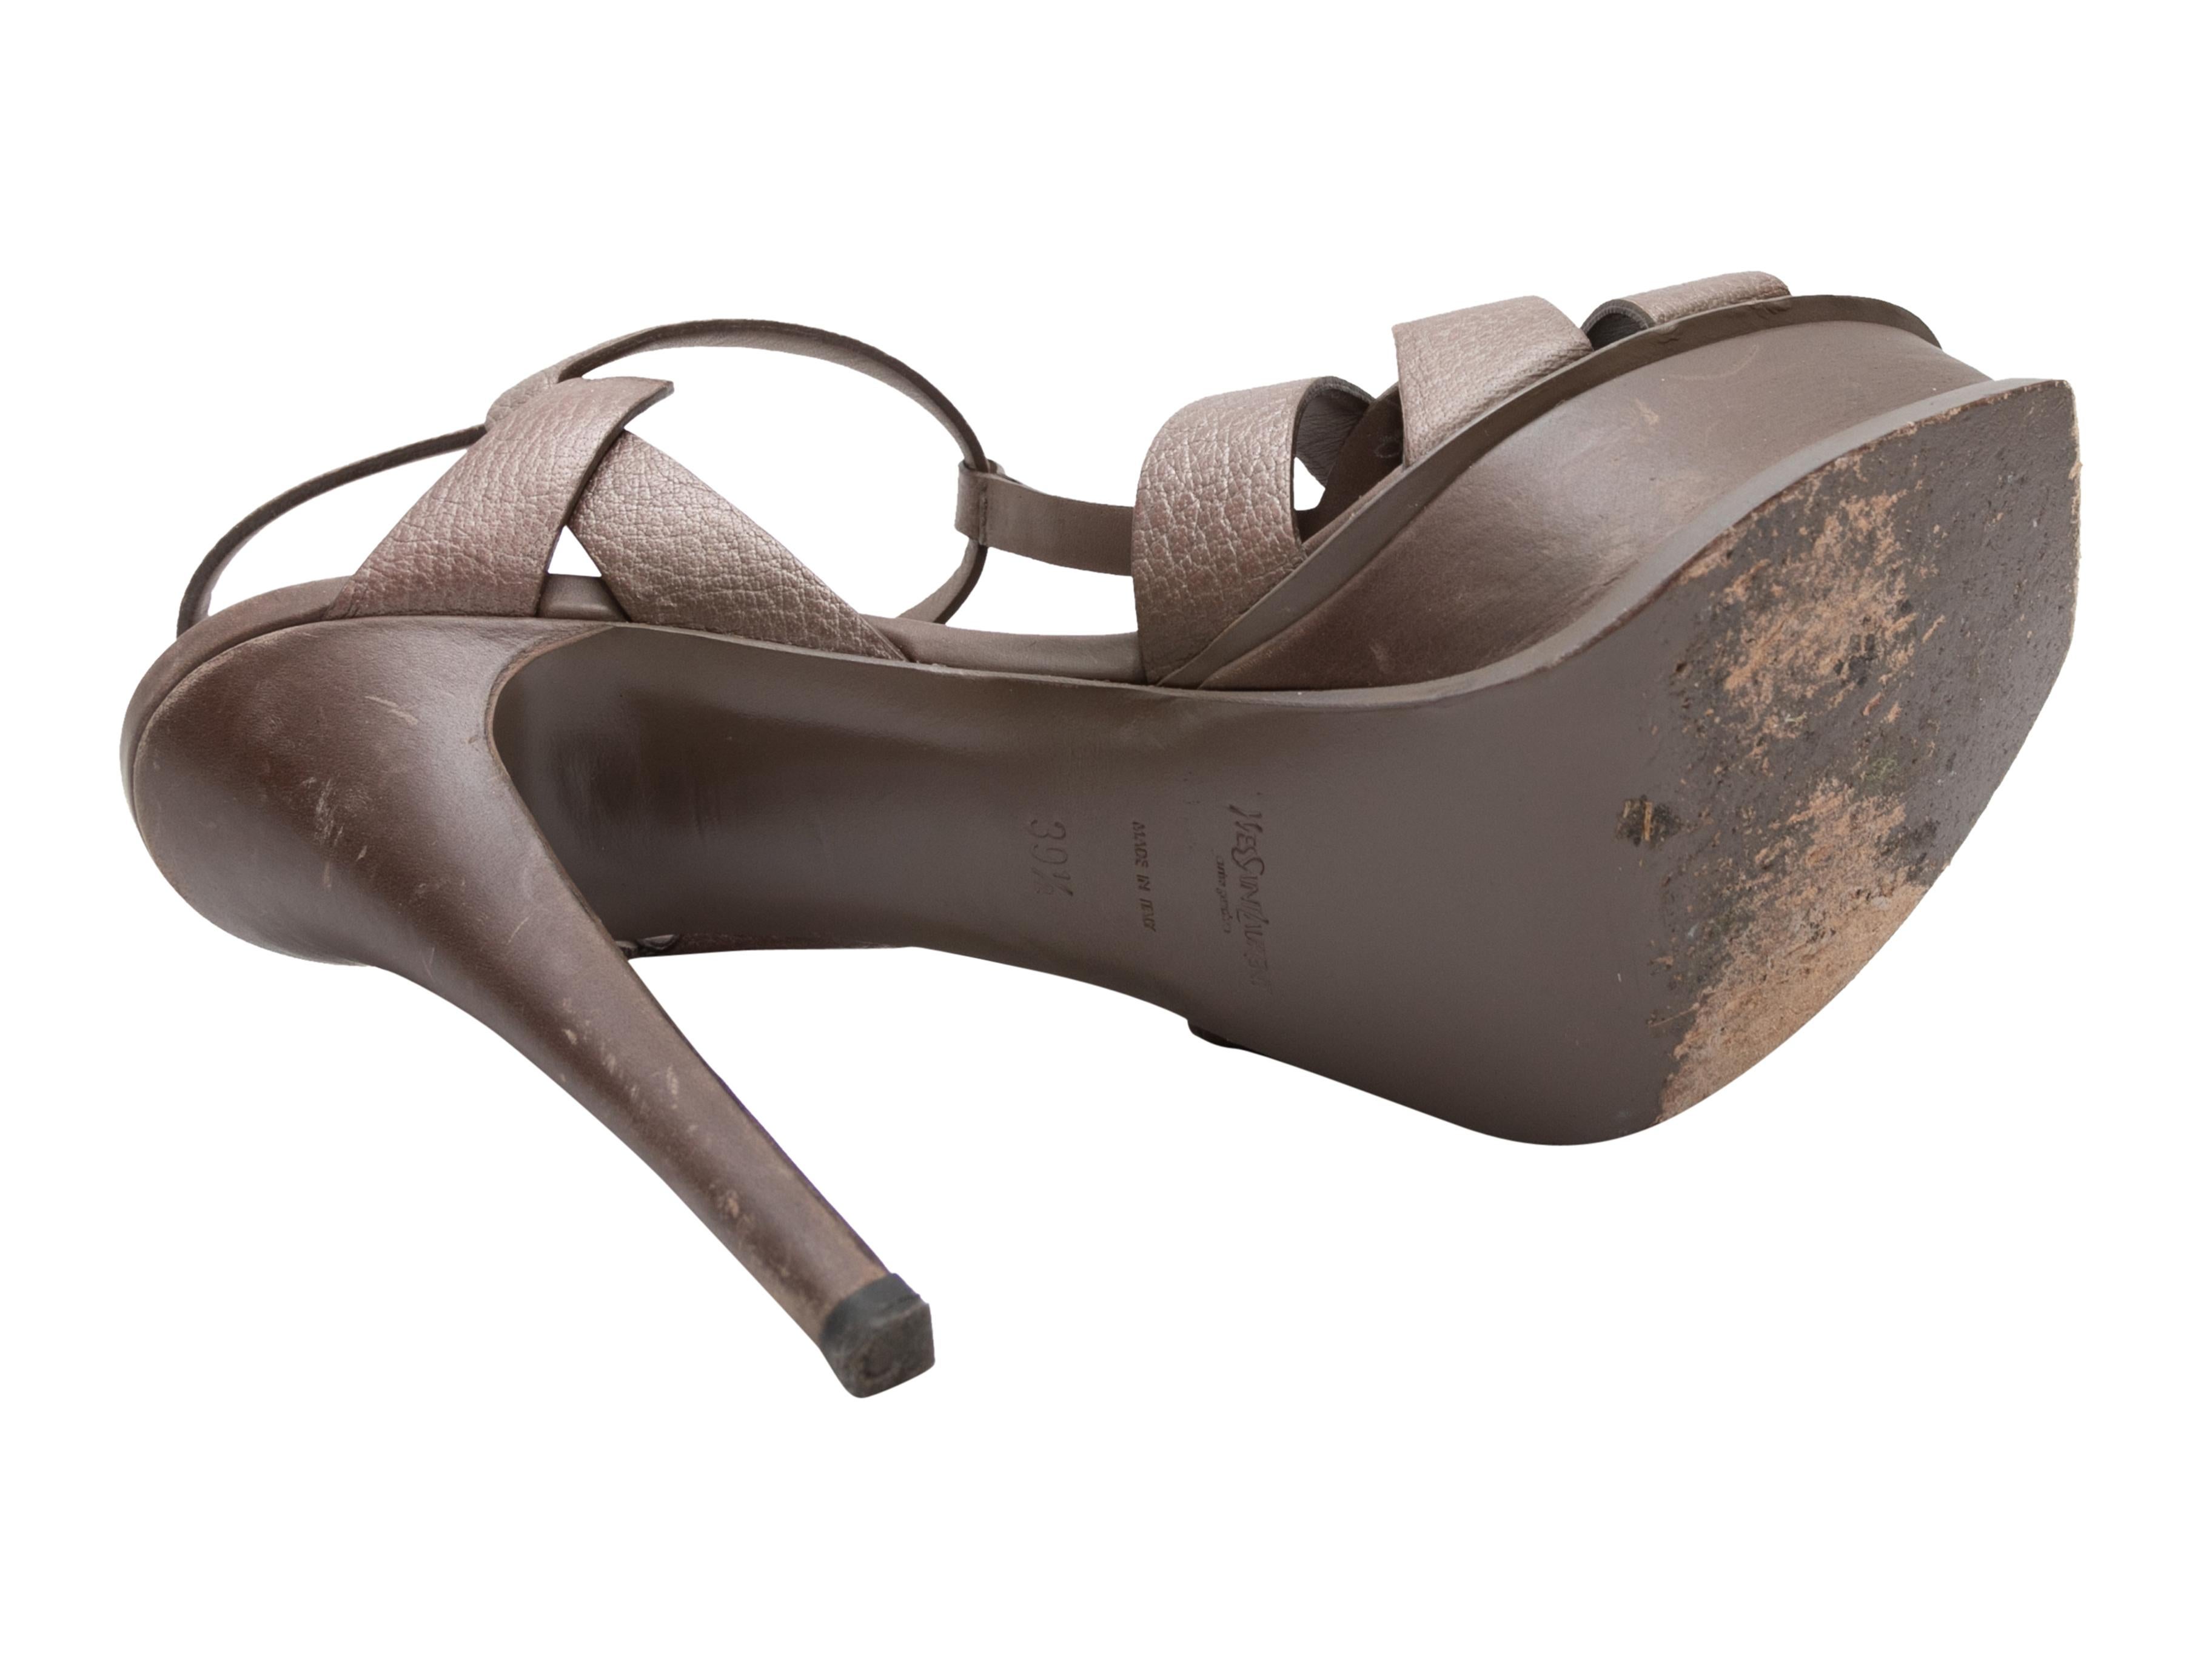 Brown leather Tribute platform heeled sandals by Yves Saint Laurent. Buckle closures at ankle straps. 1